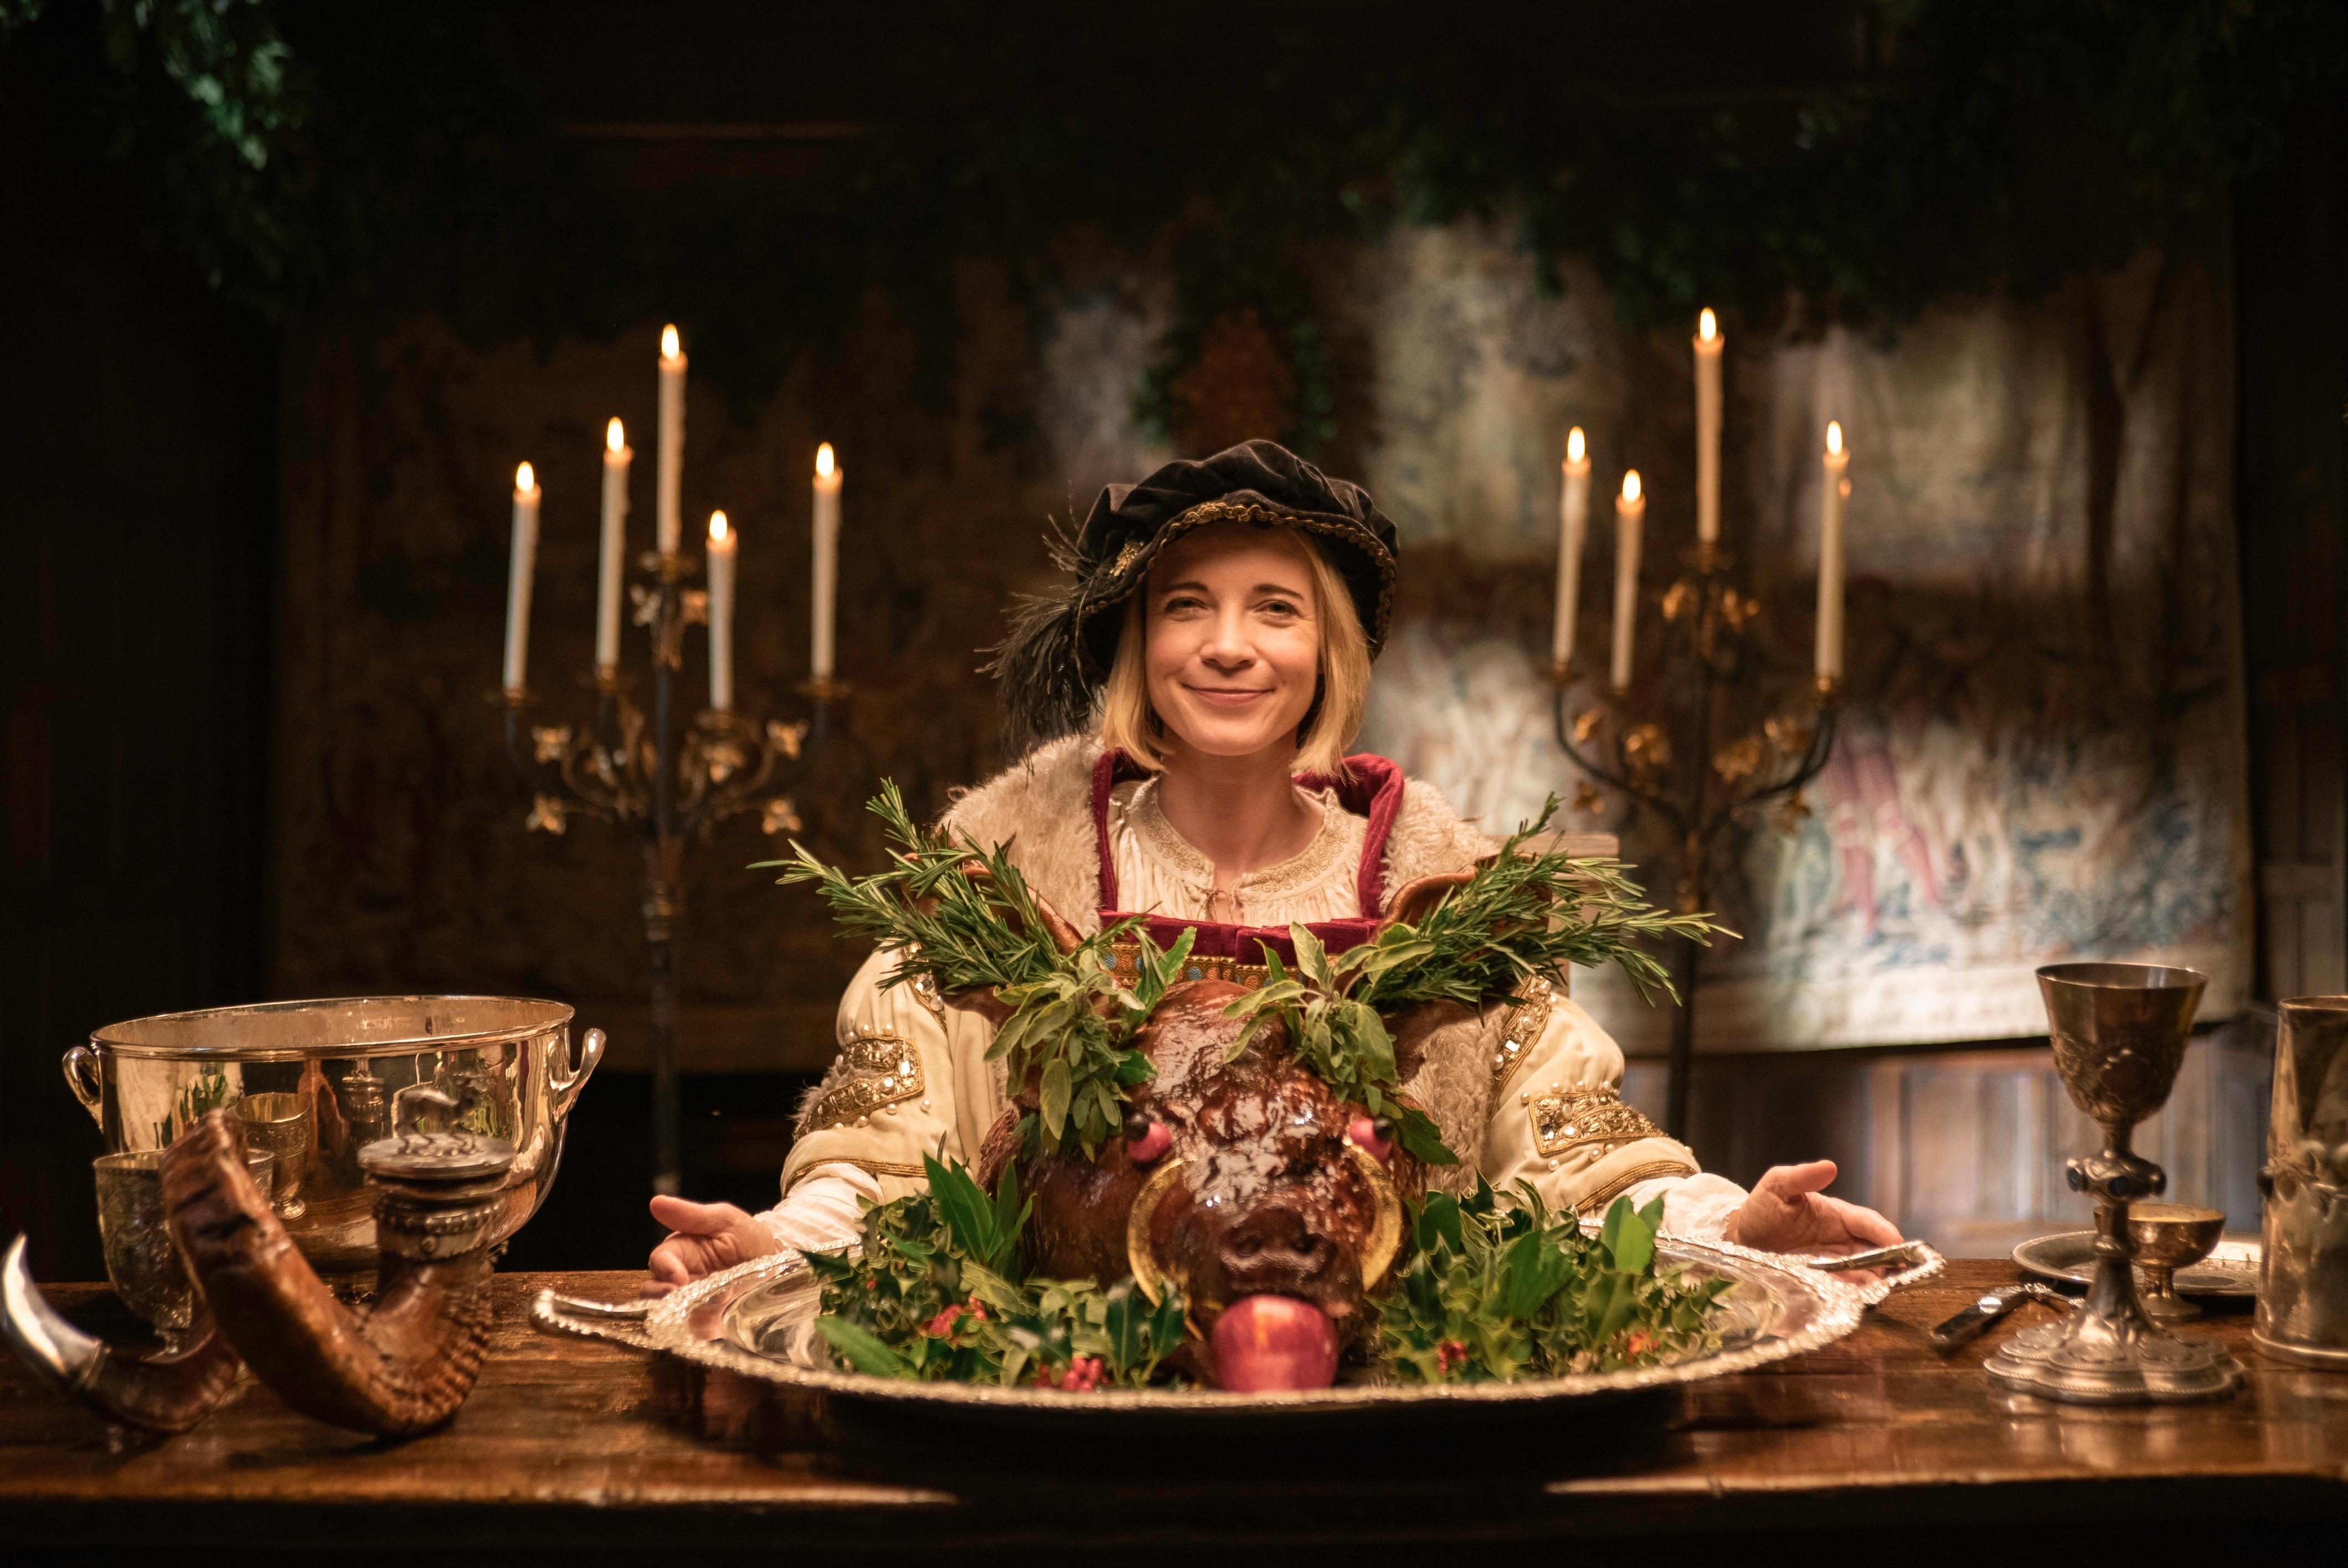 Lucy Worsley in Henry VIII costume with boar's head.